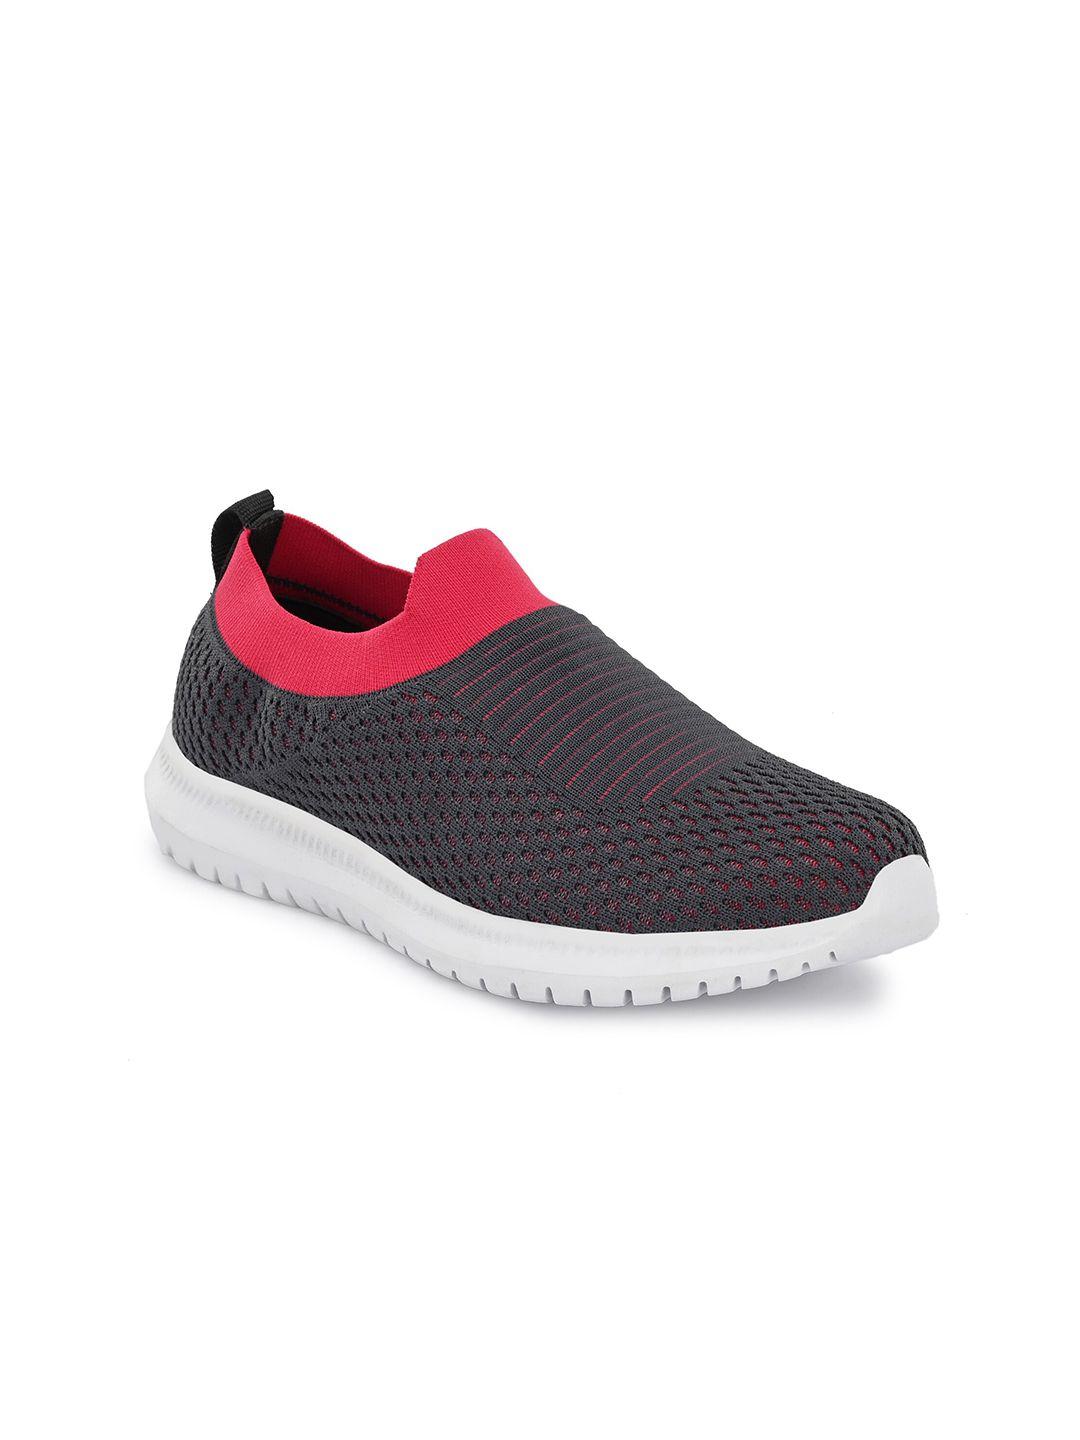 OFF LIMITS Women Mesh Mid top Non-Marking Slip On Walking Shoes